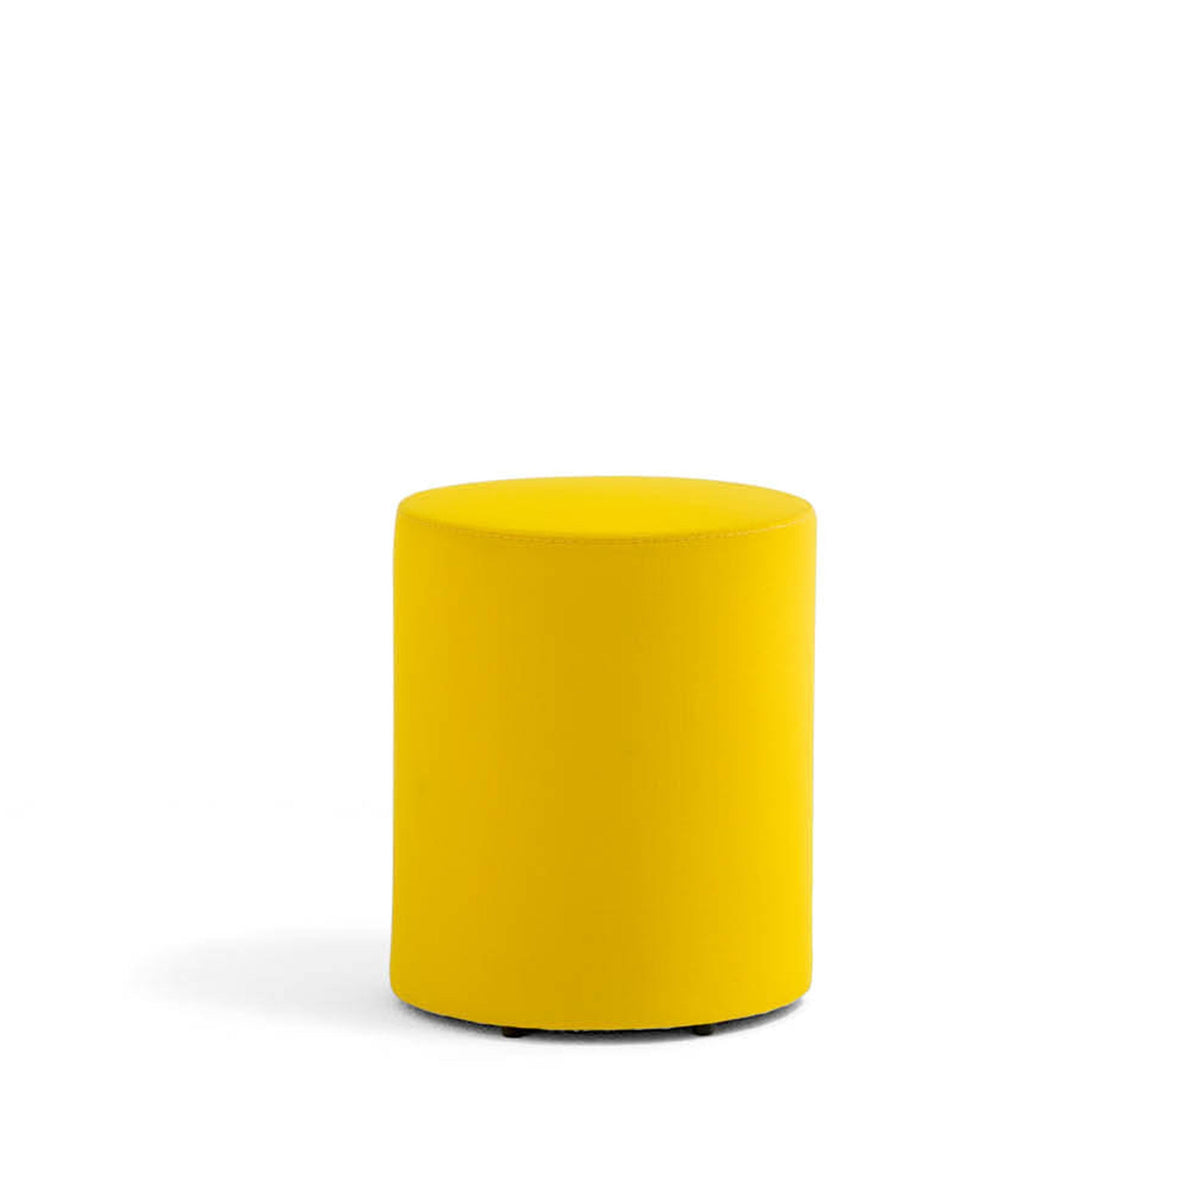 Wow Small Drum Stool-Pedrali-Contract Furniture Store